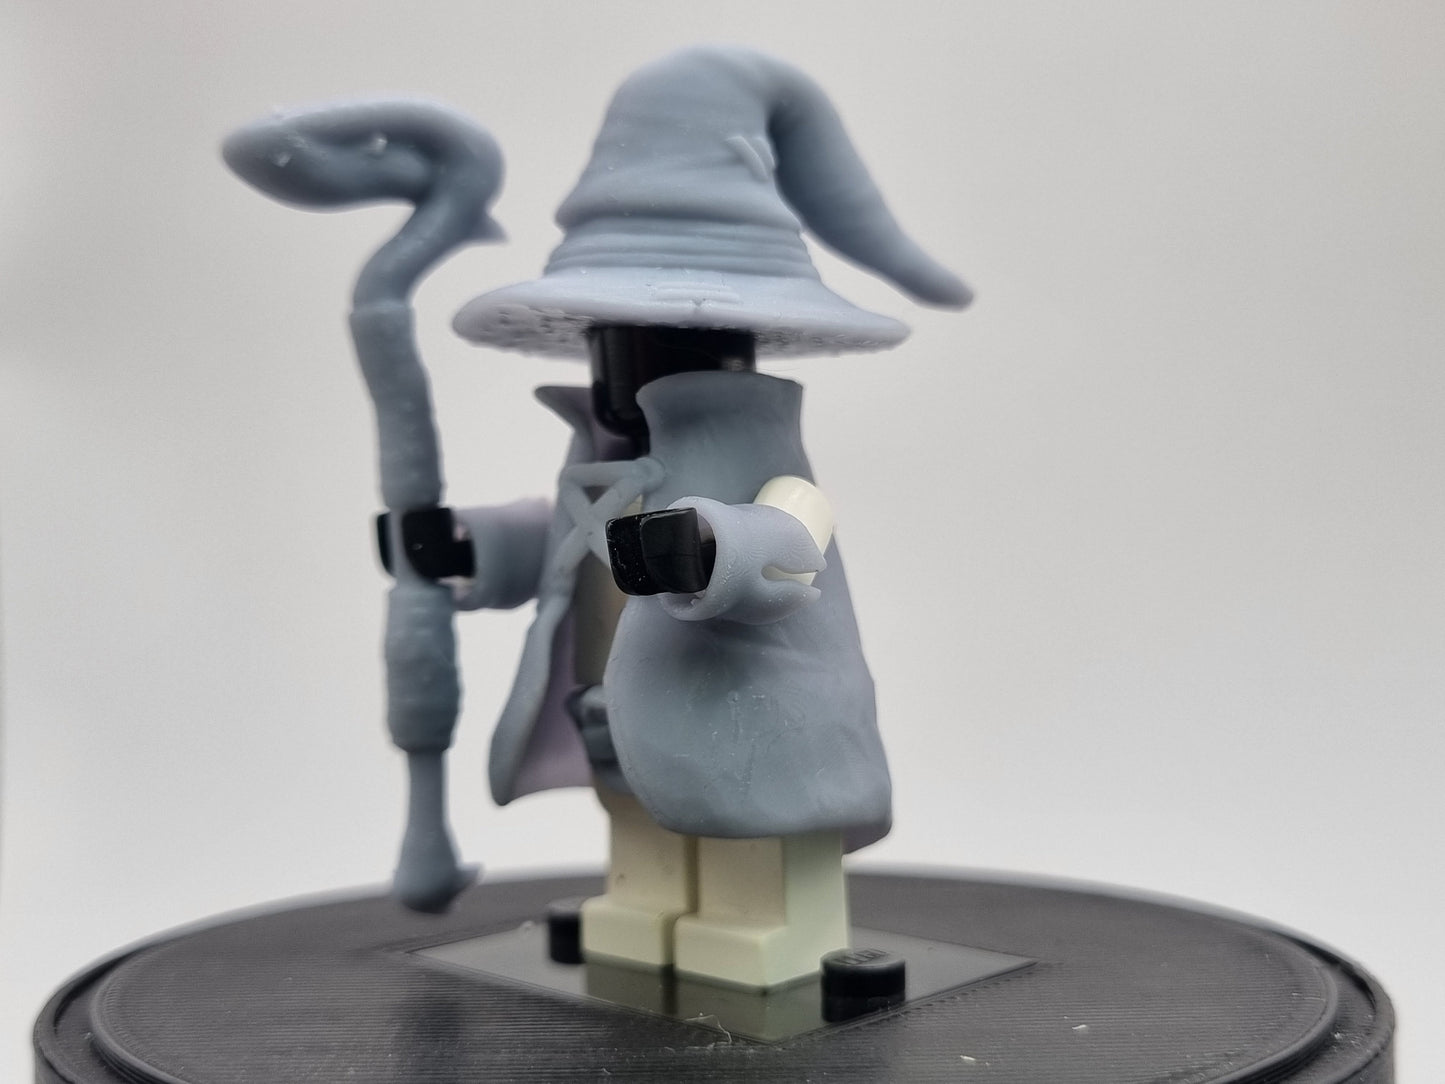 Building toy custom 3D wizard with staff armor set!